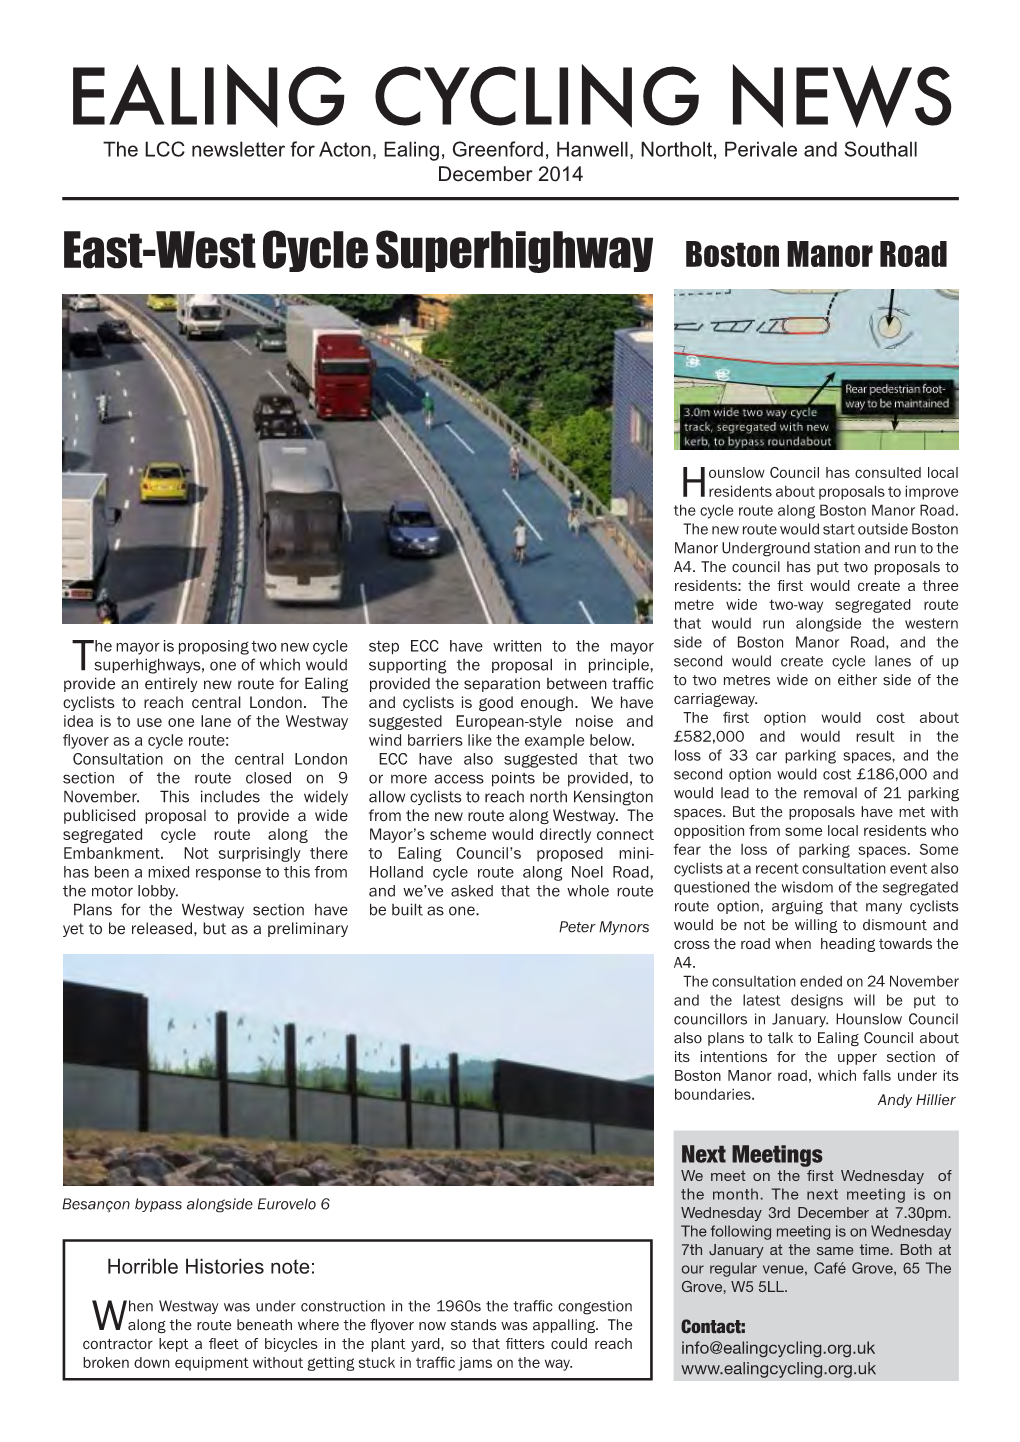 EALING CYCLING NEWS the LCC Newsletter for Acton, Ealing, Greenford, Hanwell, Northolt, Perivale and Southall December 2014